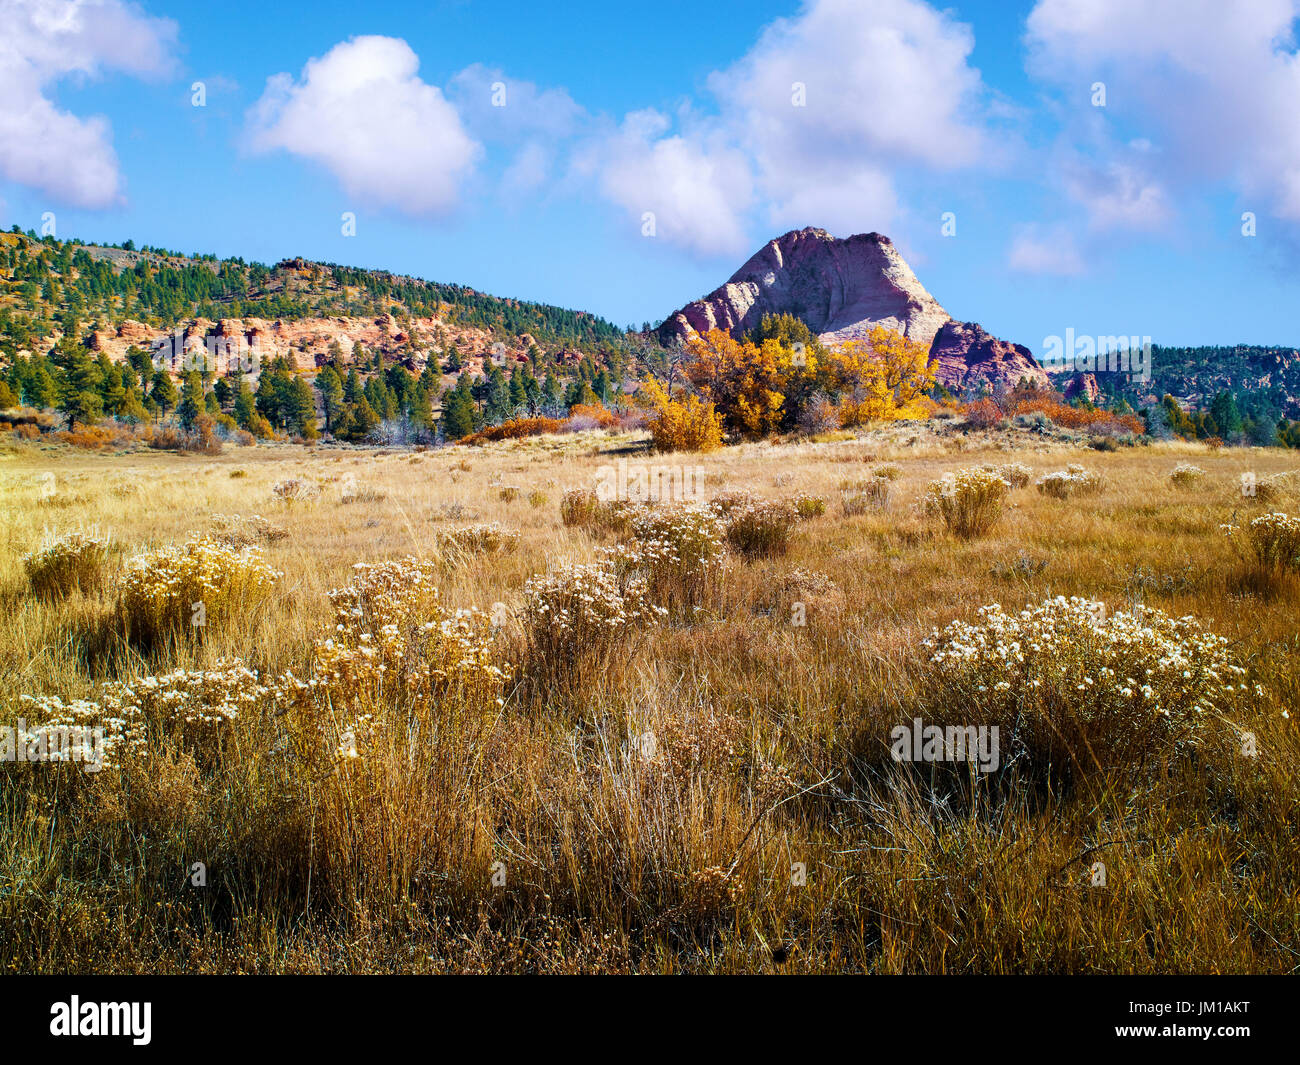 A view of the Kolob Canyons landscape, during the fall season, near Zion National Park, Utah, USA Stock Photo